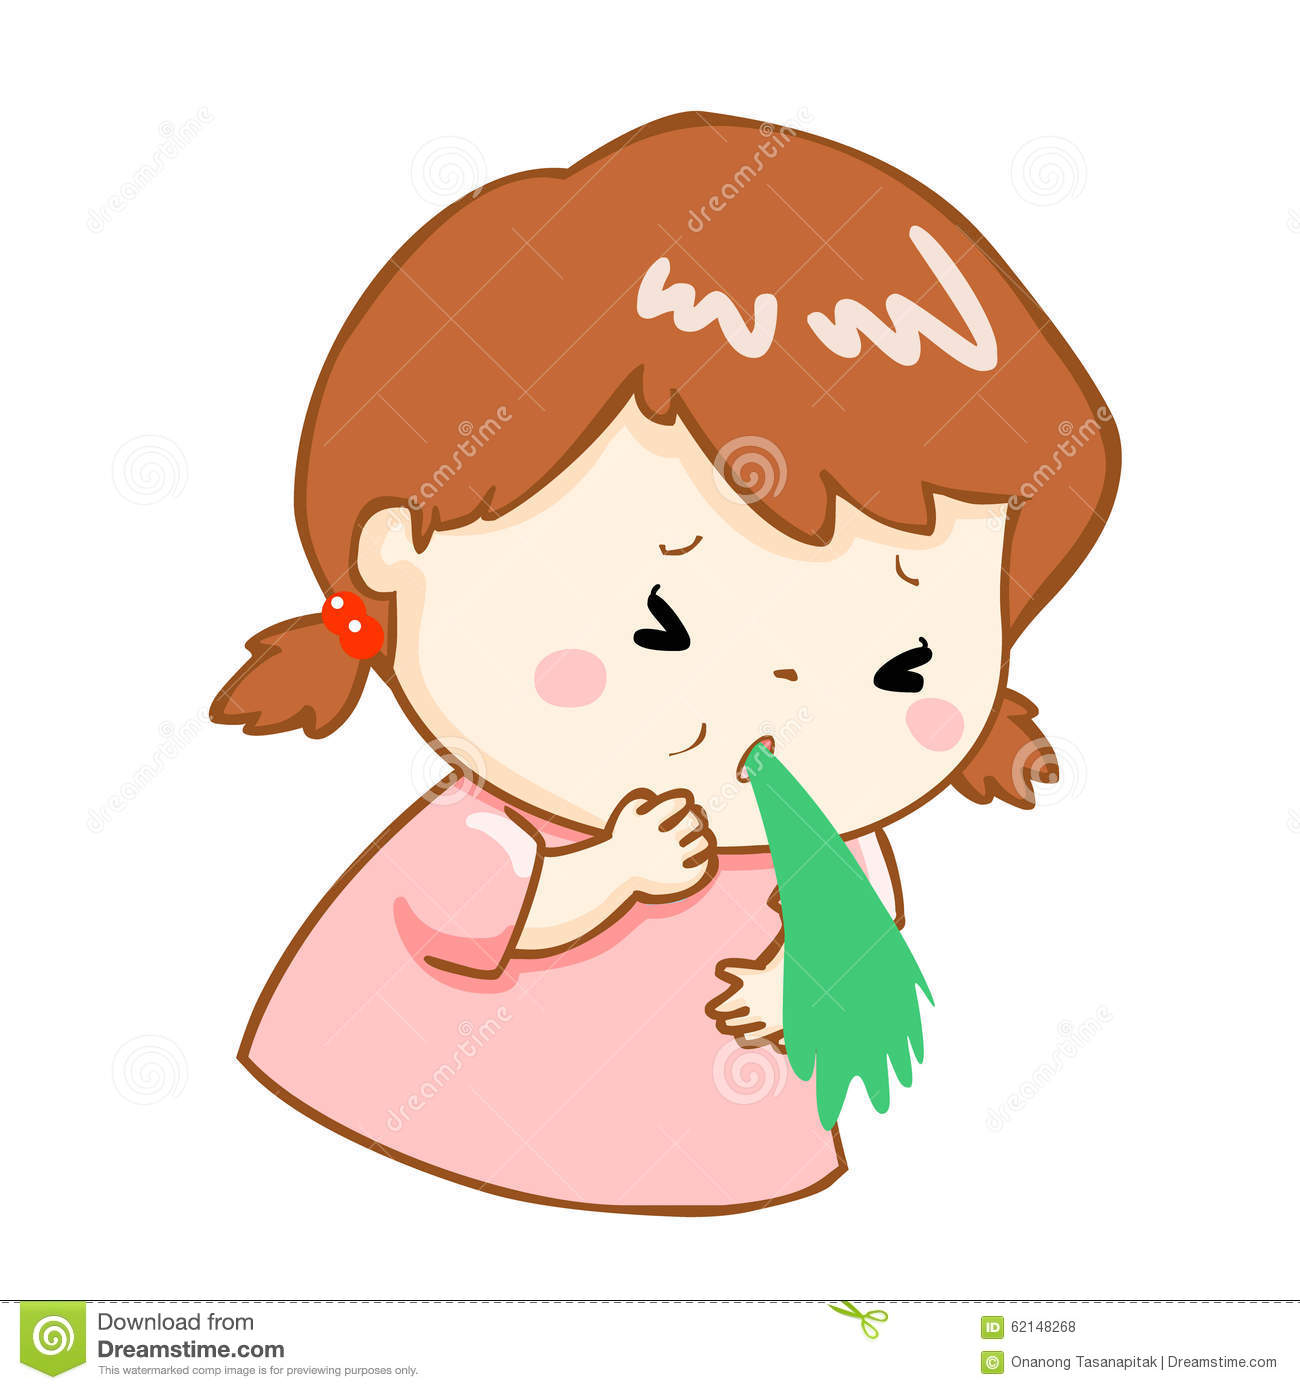 woman vomiting clipart - Clipground